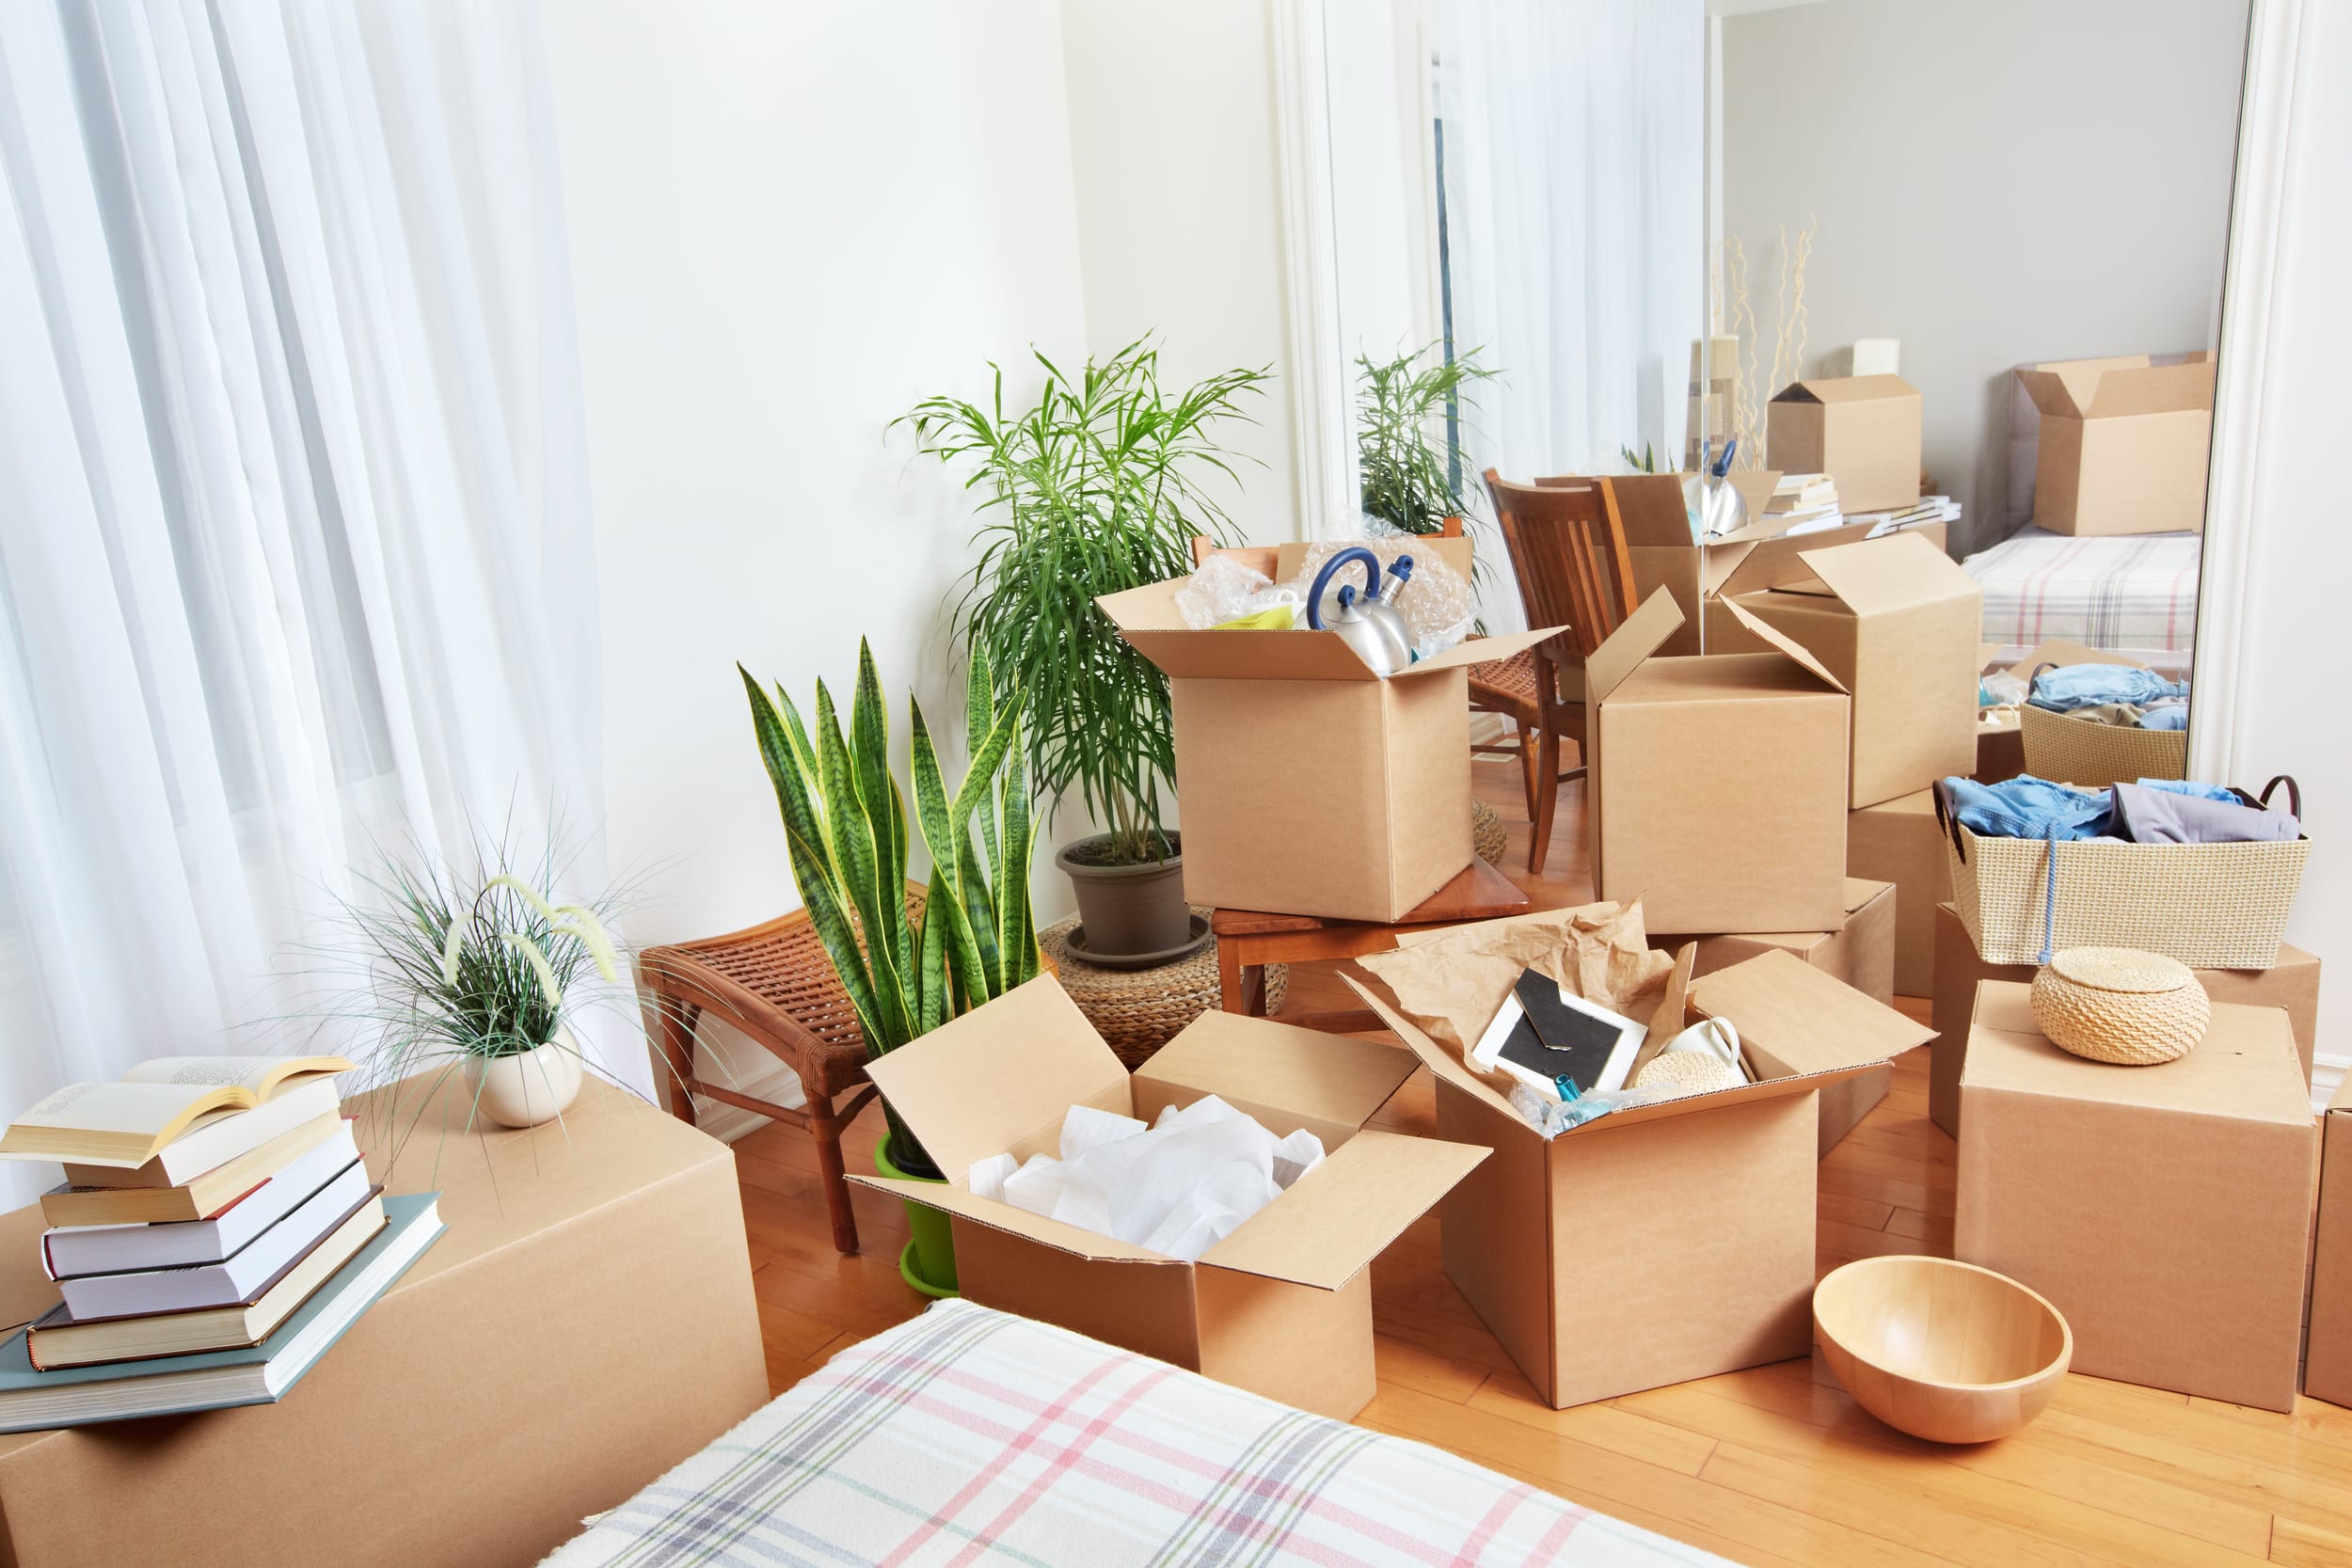 Pick the Removal Company You Can Rely On